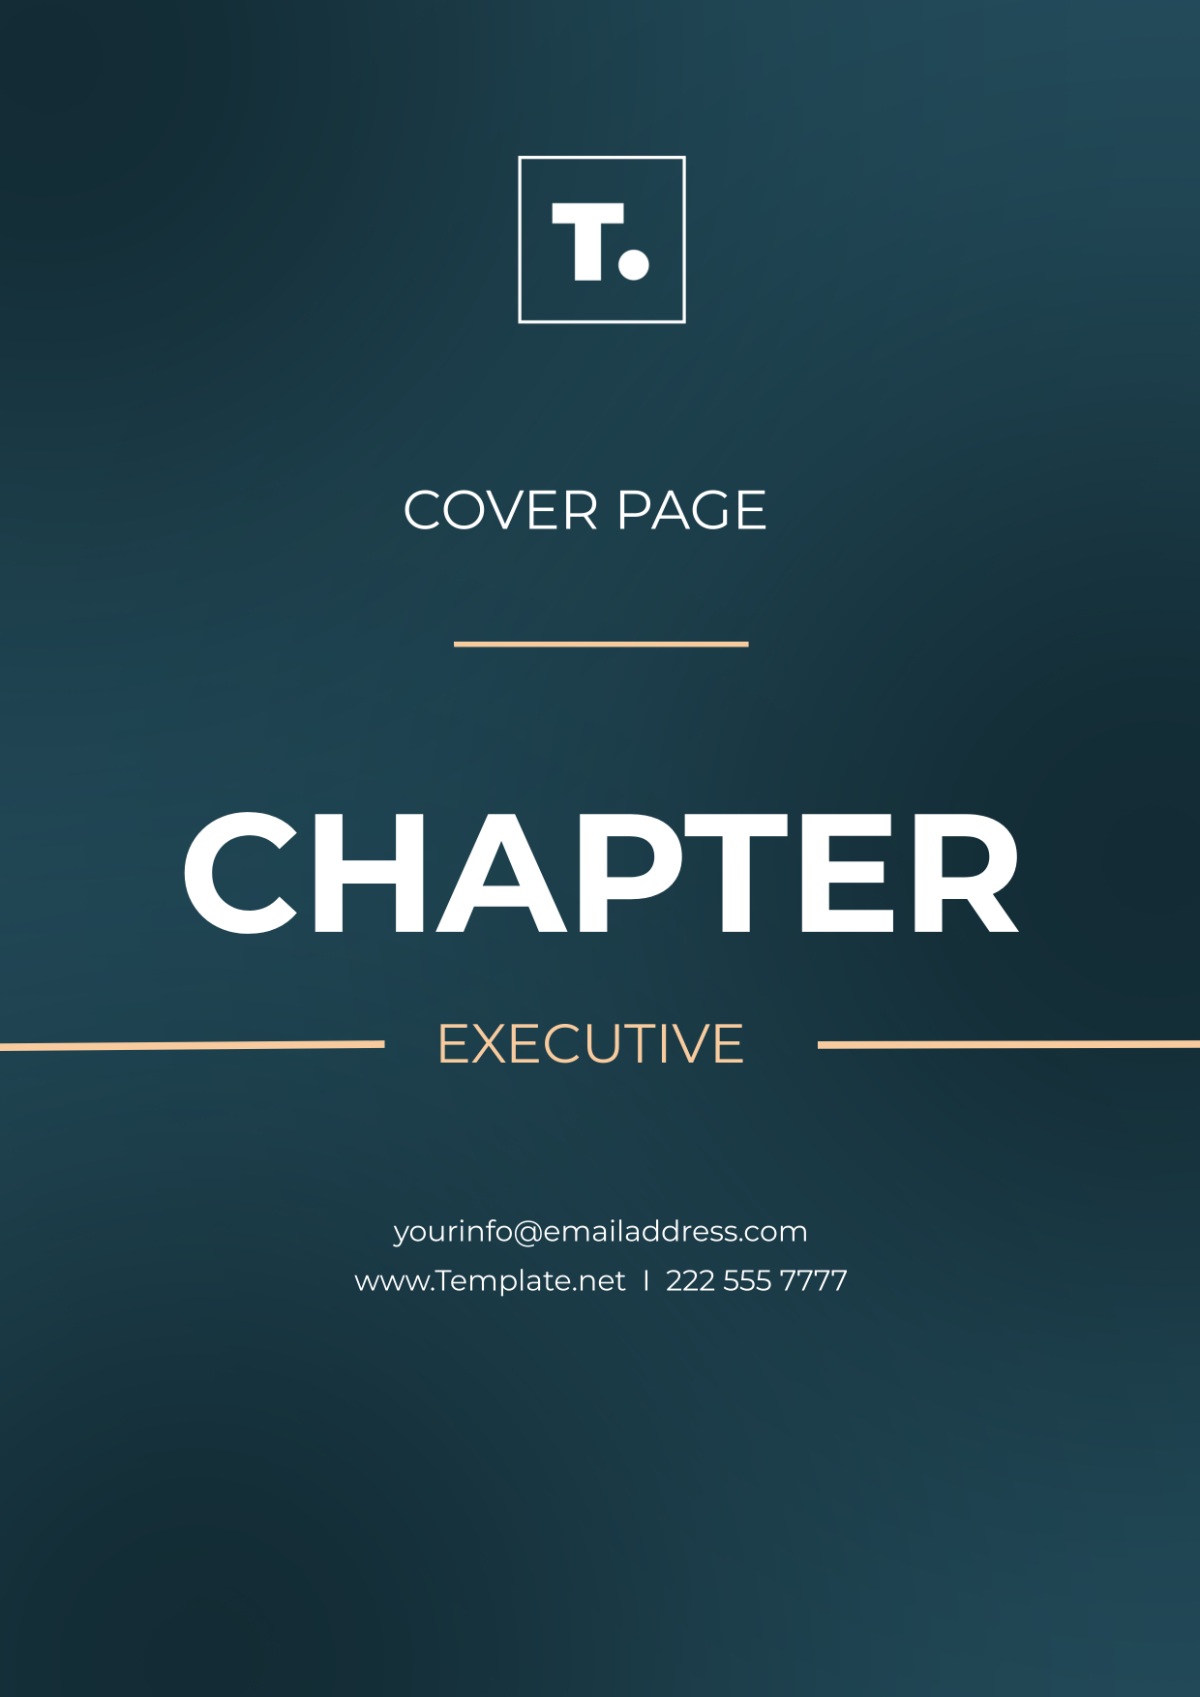 Free Chapter Executive Cover Page Template